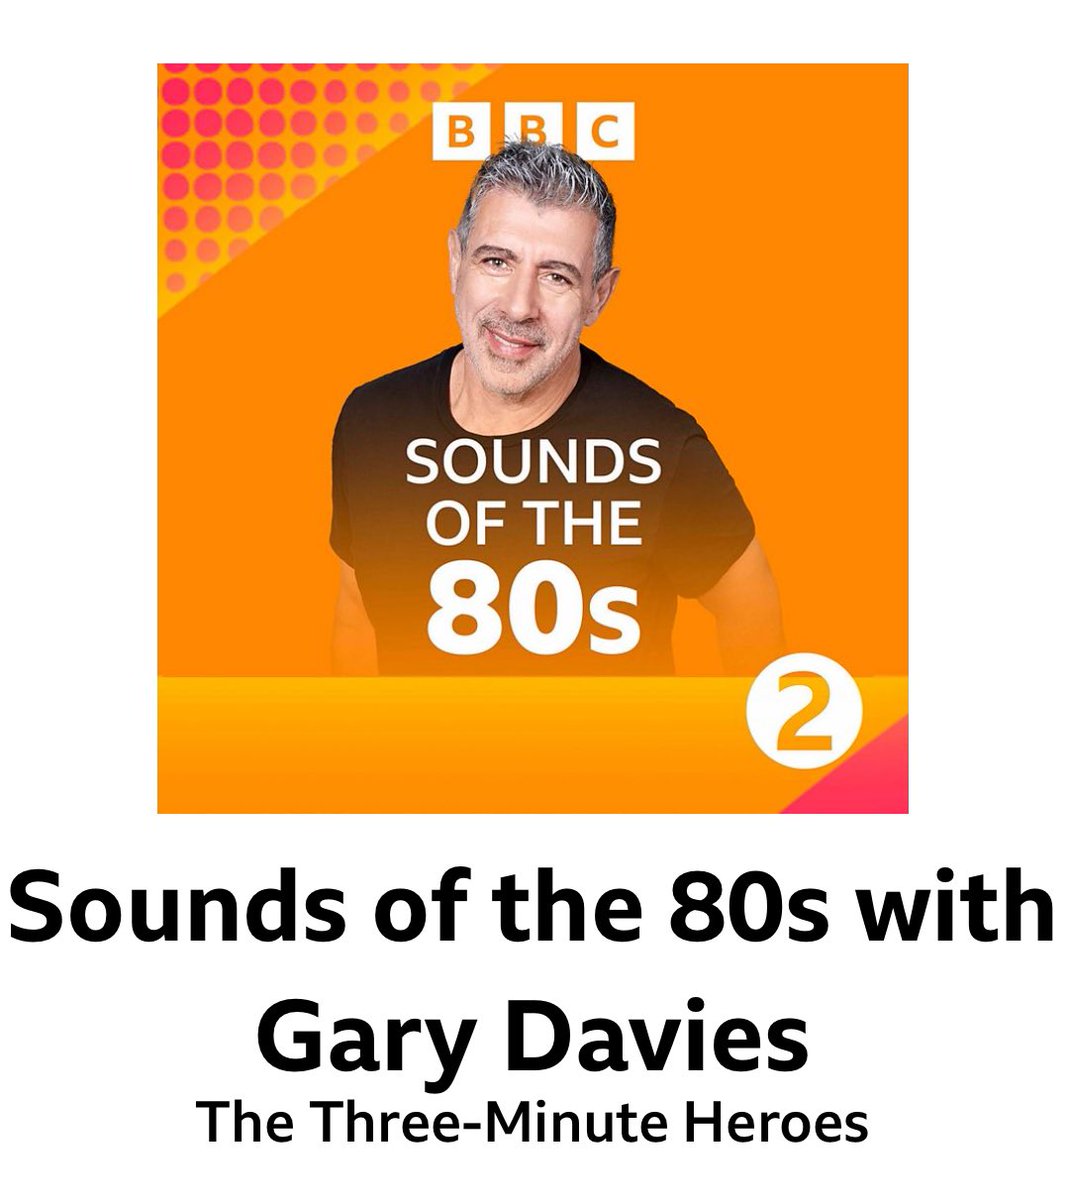 Tonight on Sounds of the 80s it’s our 3 minute heroes special. How many songs of 3 min or less do you think we can play in 2 hours? Tune in and find out 8pm @bbcradio2 @bbcsounds #soundsofthe80s